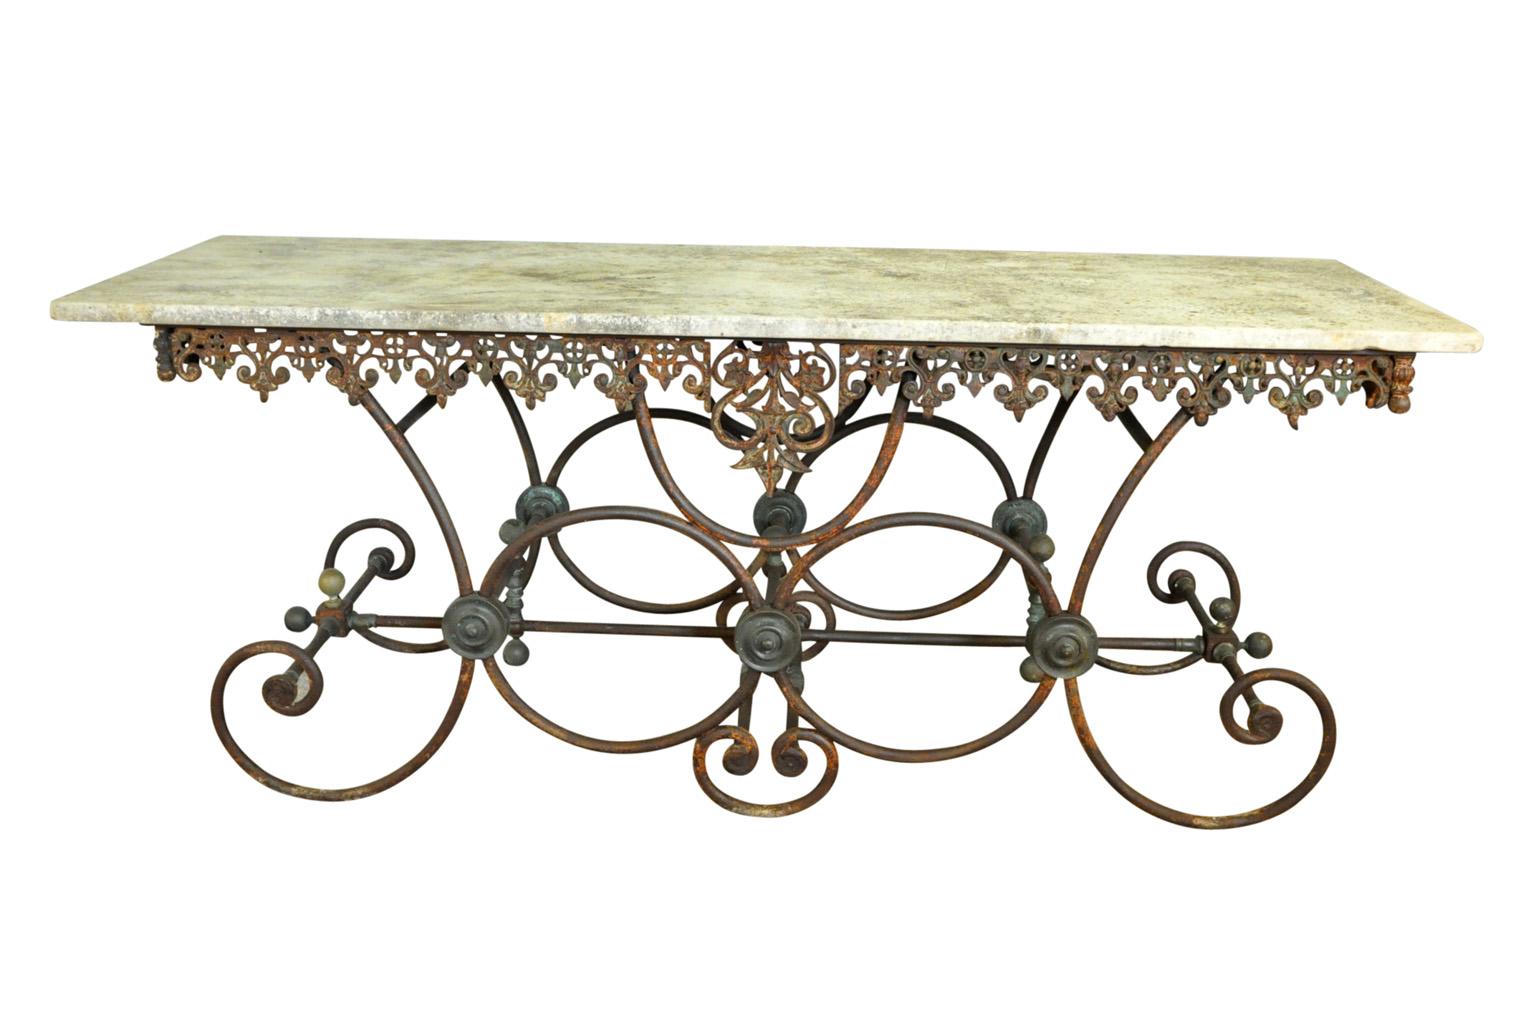 Outstanding and monumental butchers table from the Provence region of France. Soundly constructed with a beautifully cast iron base with its original marble top. Excellent quality and fabulous patina. Wonderful as a kitchen island, console, garden